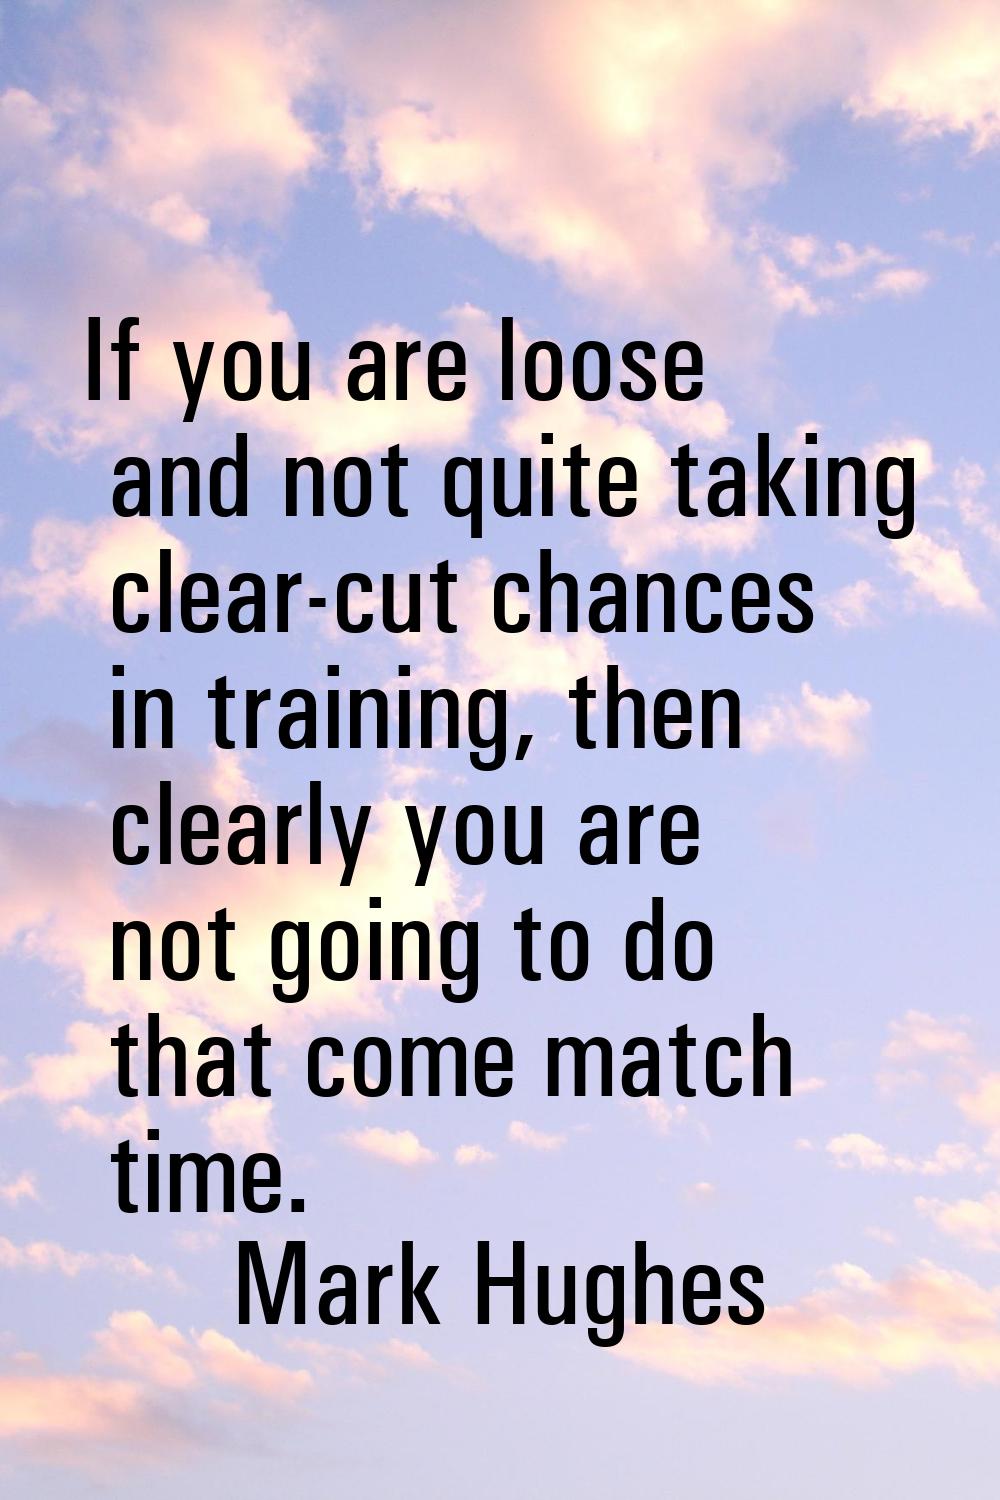 If you are loose and not quite taking clear-cut chances in training, then clearly you are not going